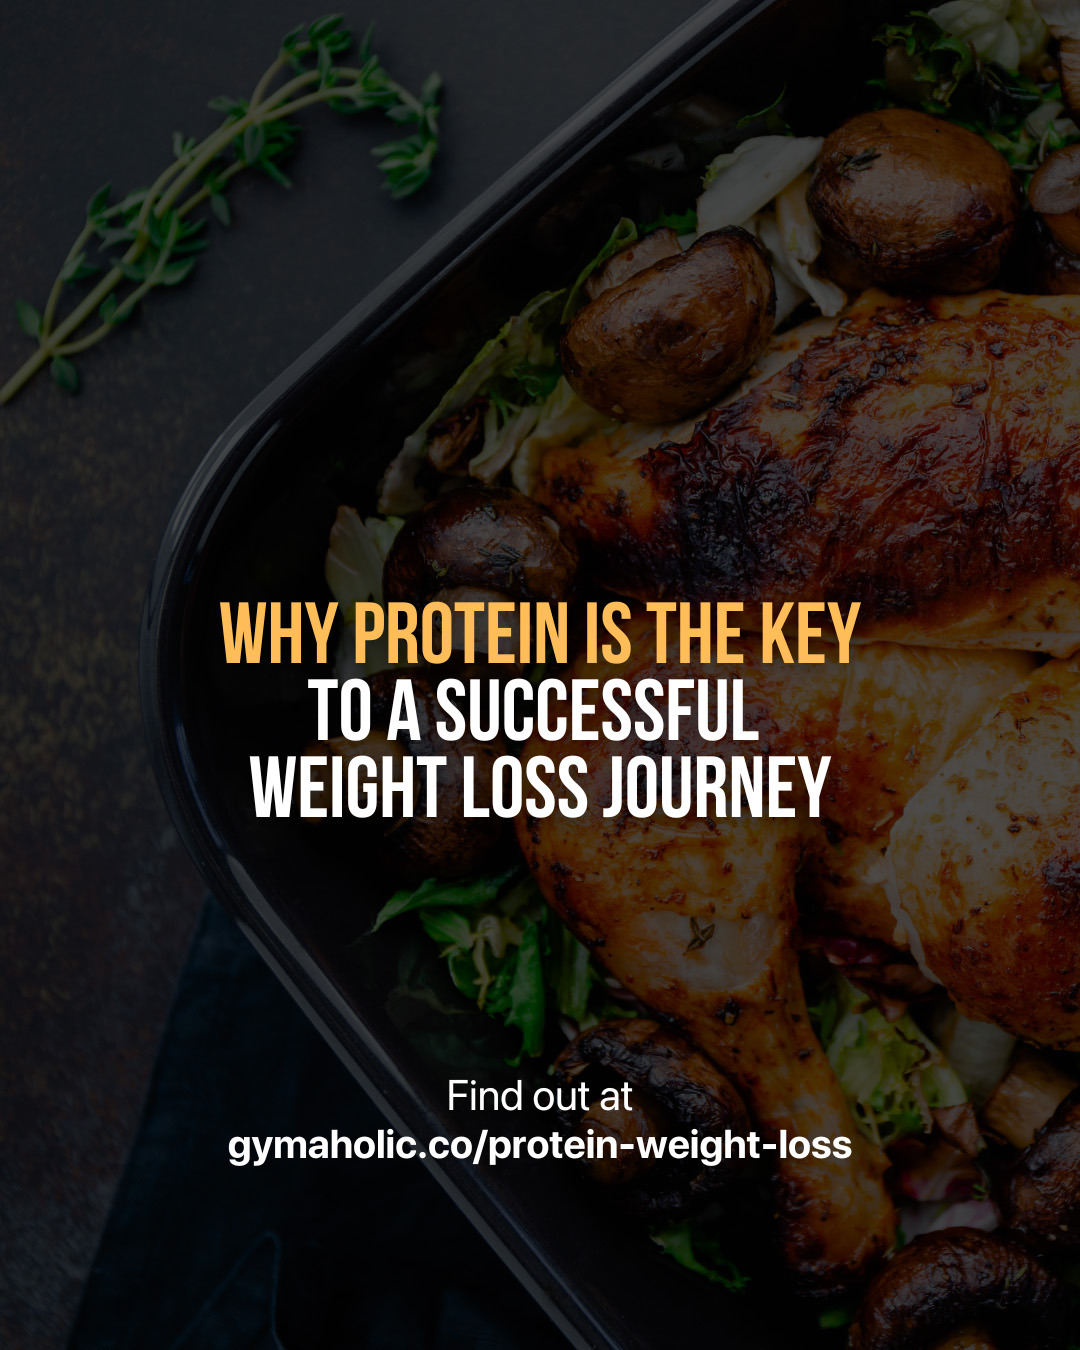 Why Protein Is the Key to A Successful Weight Loss Journey